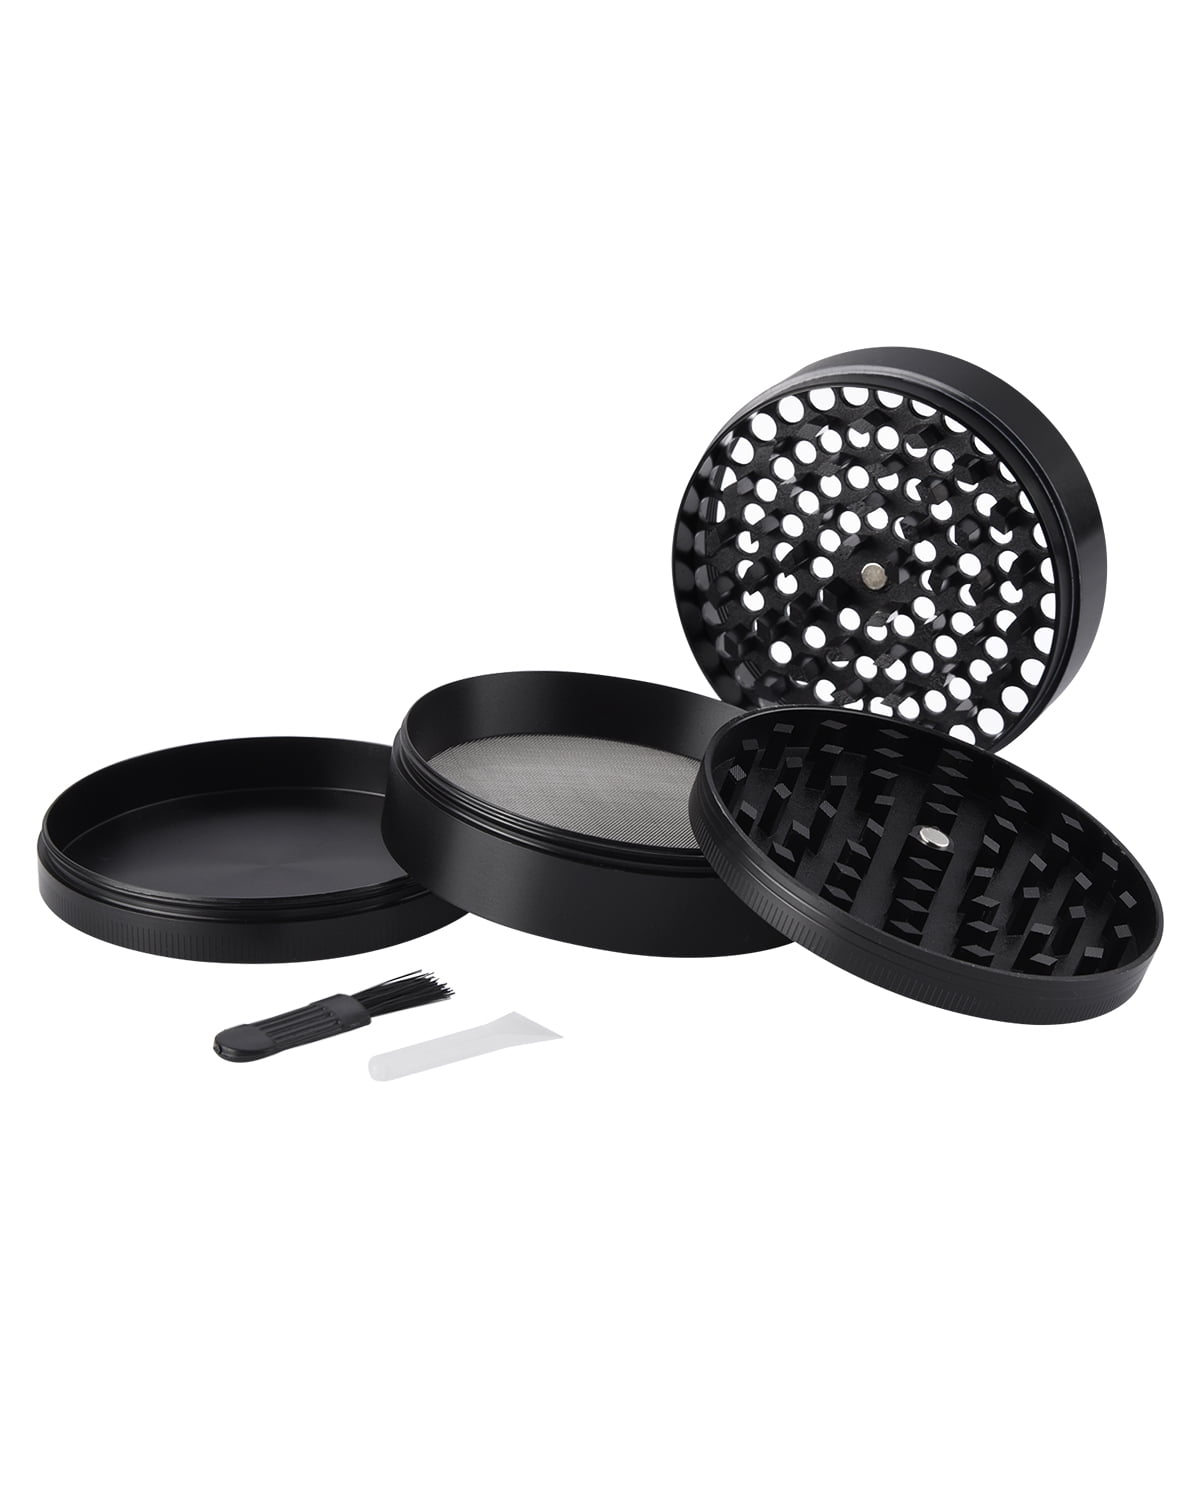 3 Inch Herb Grinder Large Black 4 Pieces Zinc Alloy Grinders with Mesh Screen Bonus Scraper and Cleaning Brush 